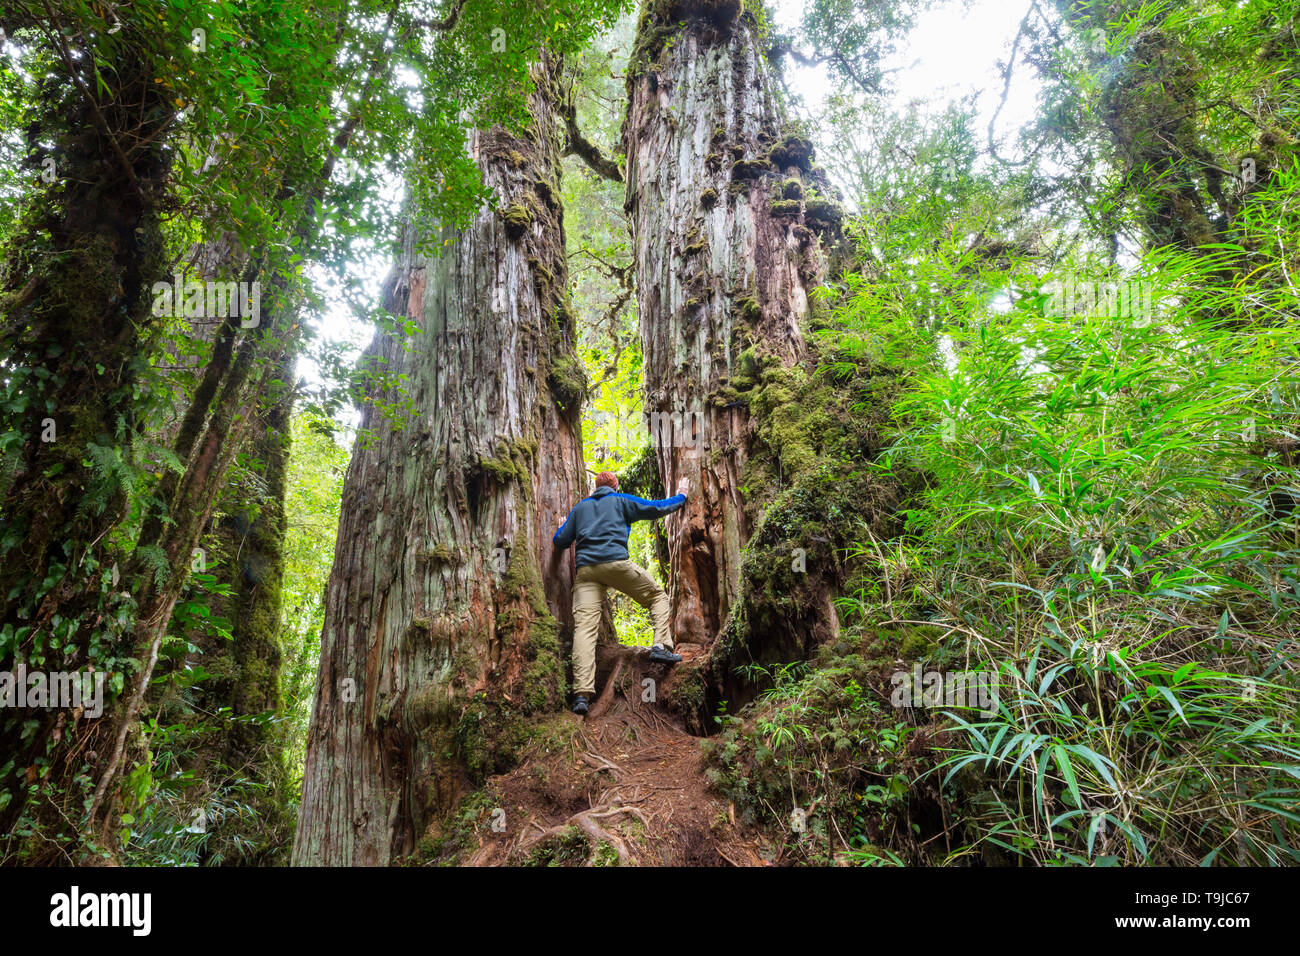 Giant tree in rain forest . Beautiful landscapes in Pumalin Park, Carretera Austral, Chile. Stock Photo